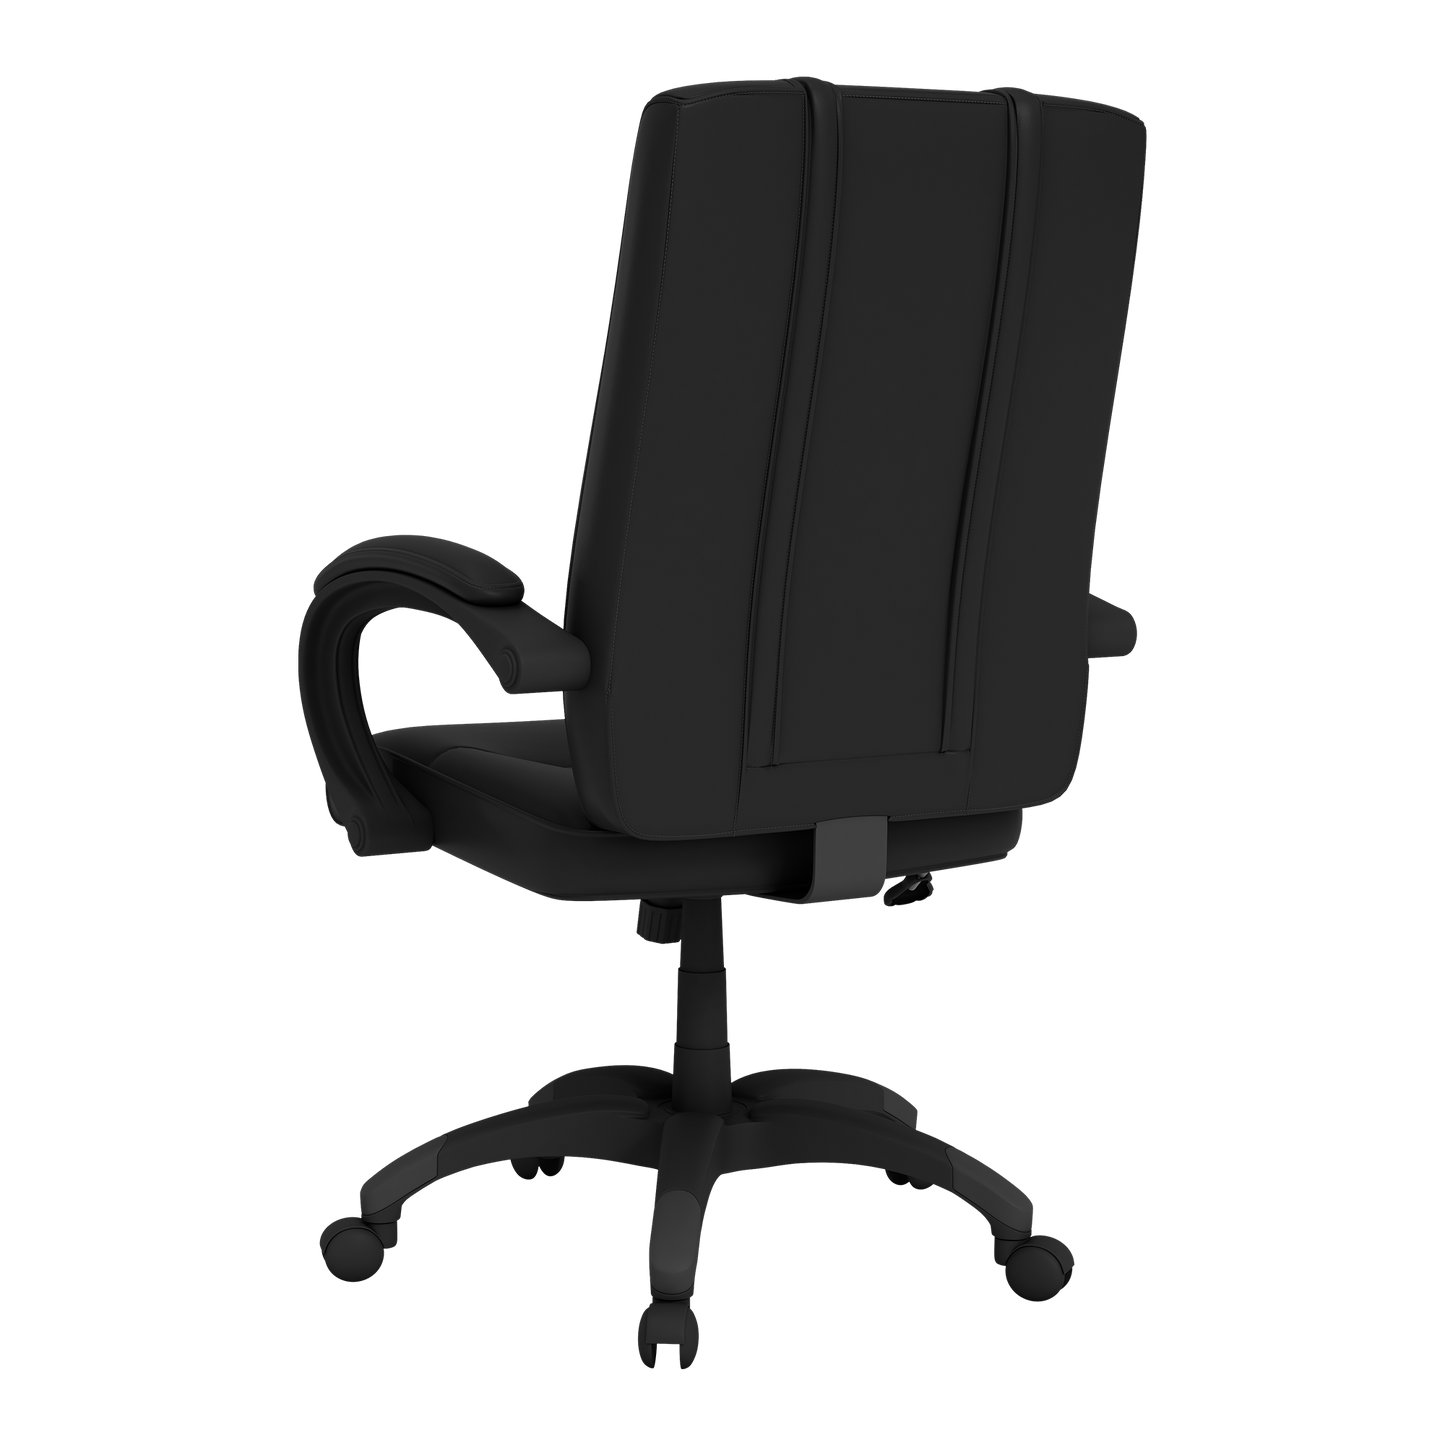 Office Chair 1000 with Chicago Blackhawks Logo